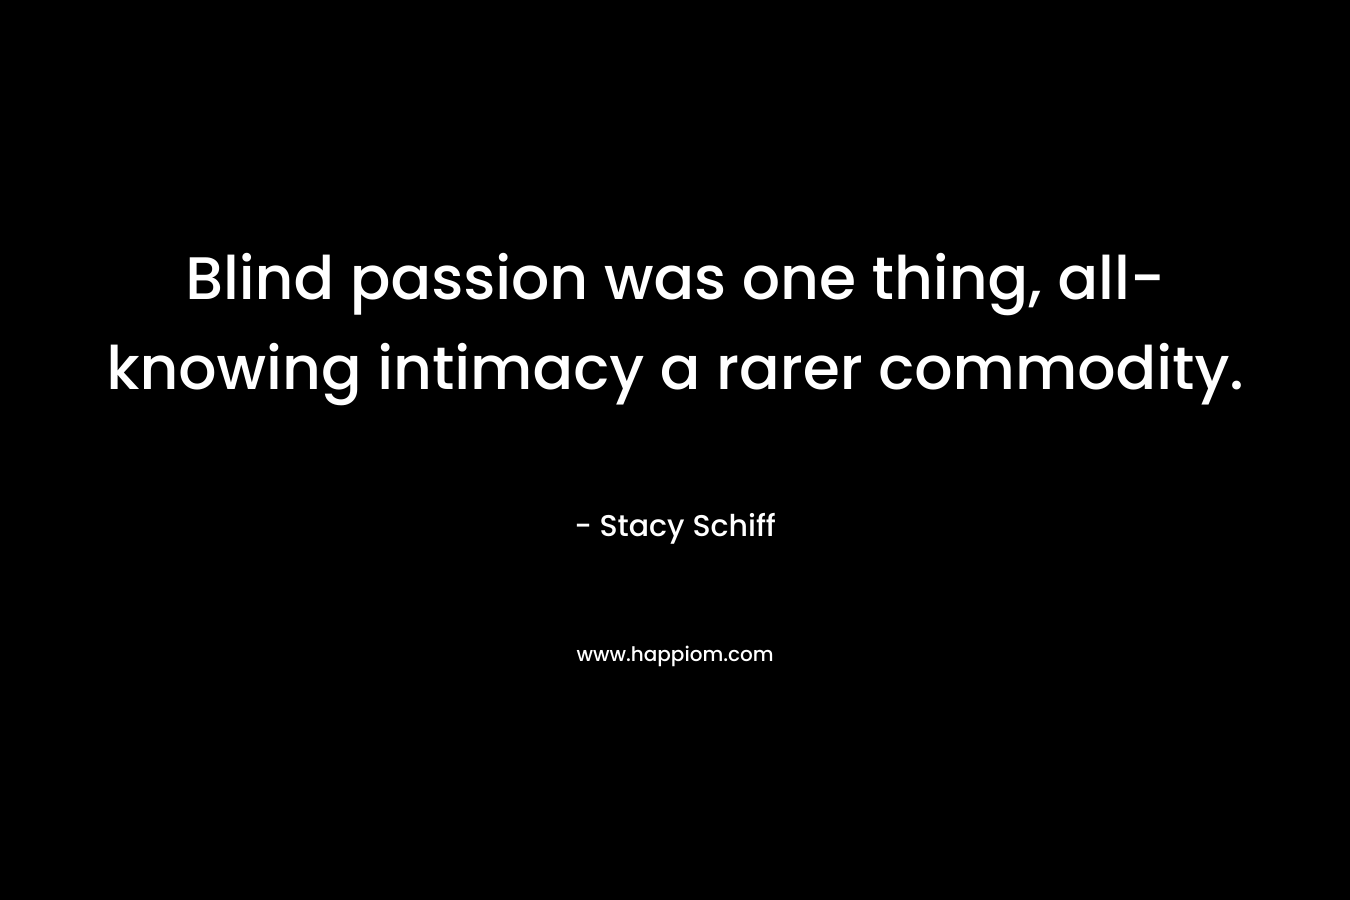 Blind passion was one thing, all-knowing intimacy a rarer commodity.